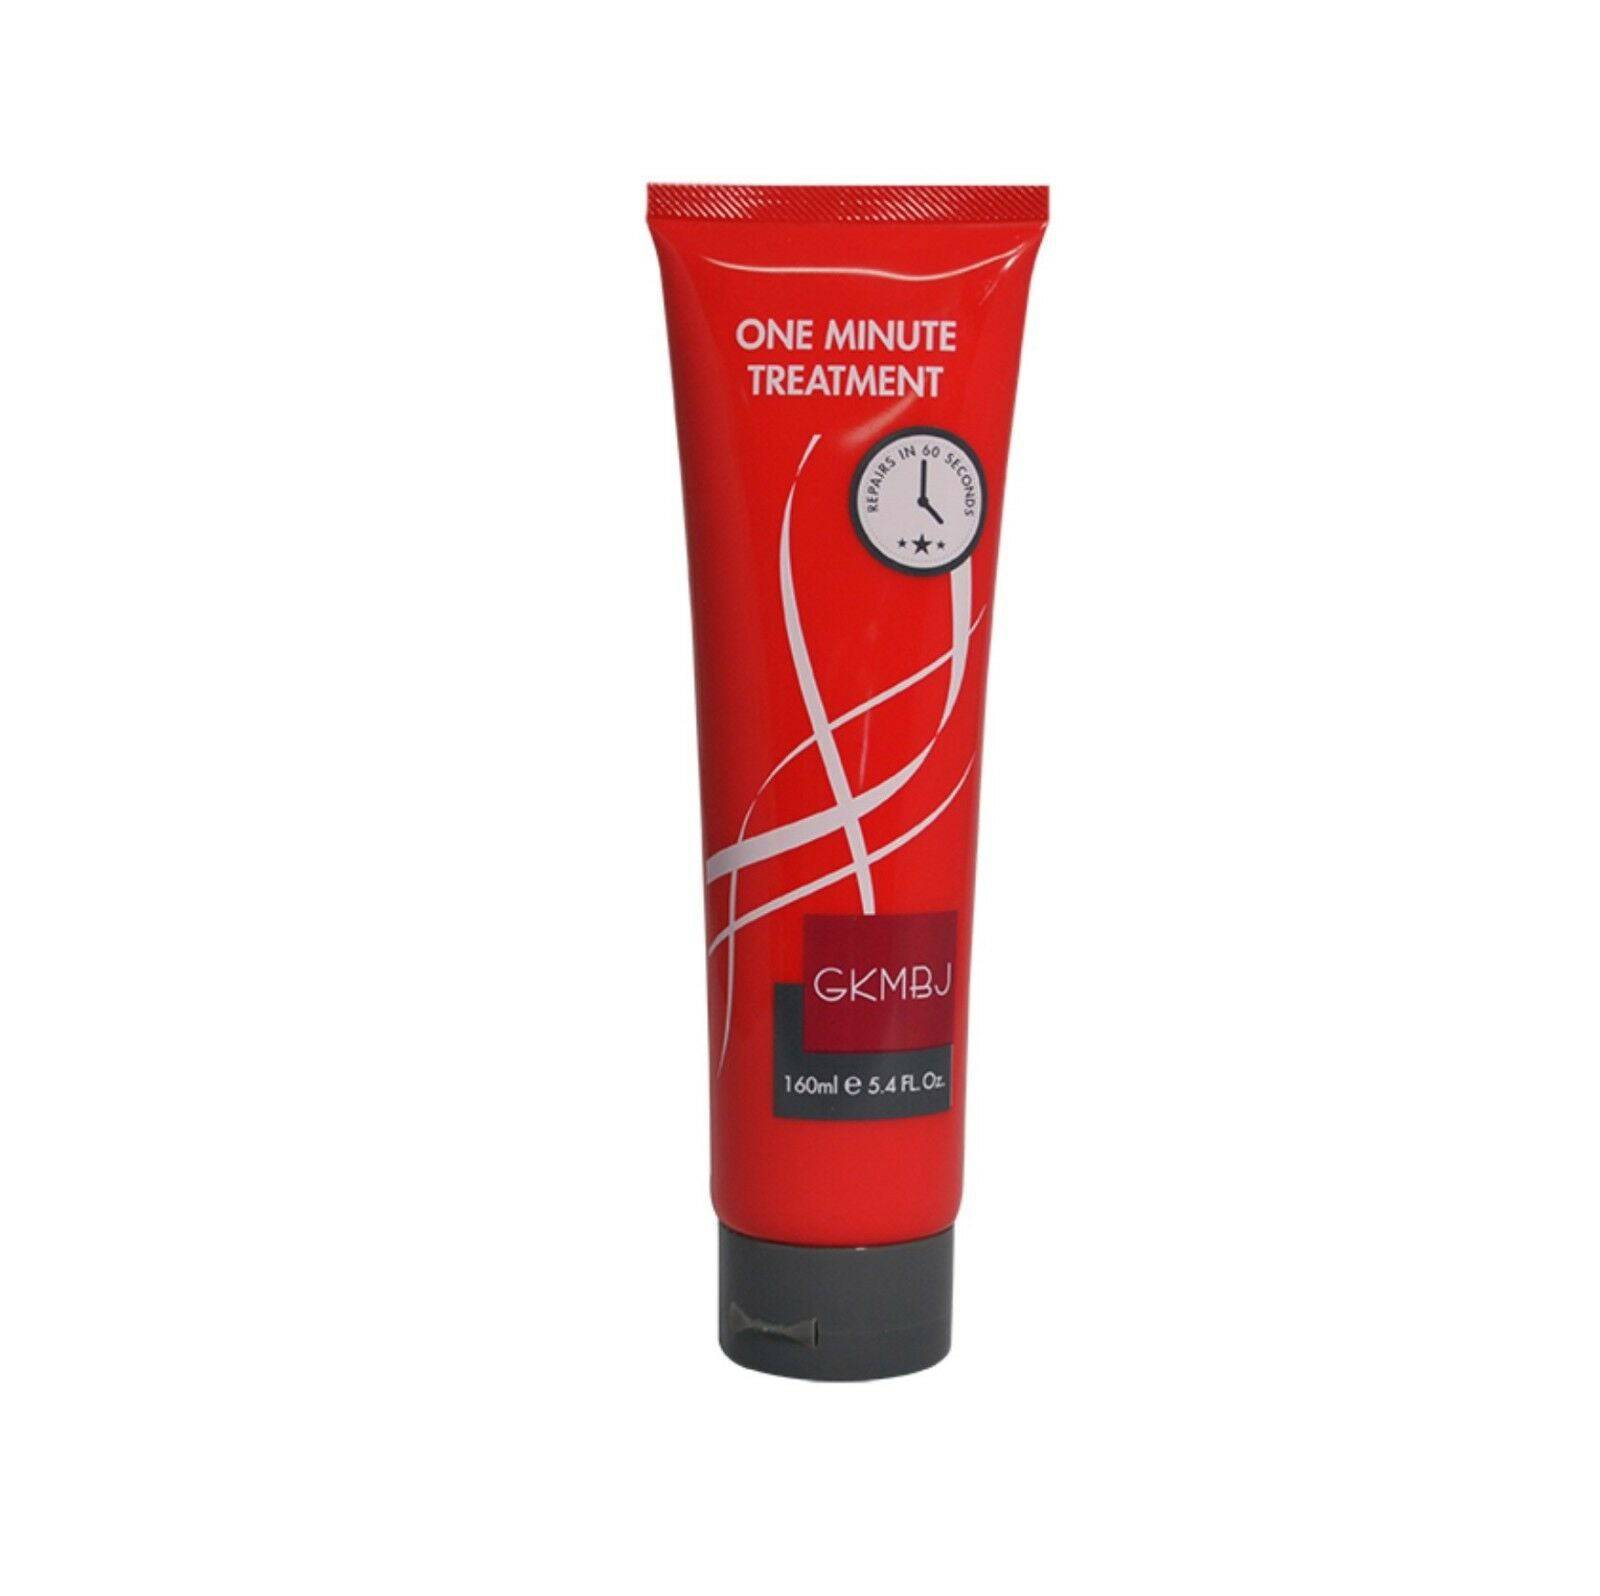 GKMBJ One Minute Treatment 160ml x 2 Repairs Damaged Hair Deeply Penetrating - On Line Hair Depot